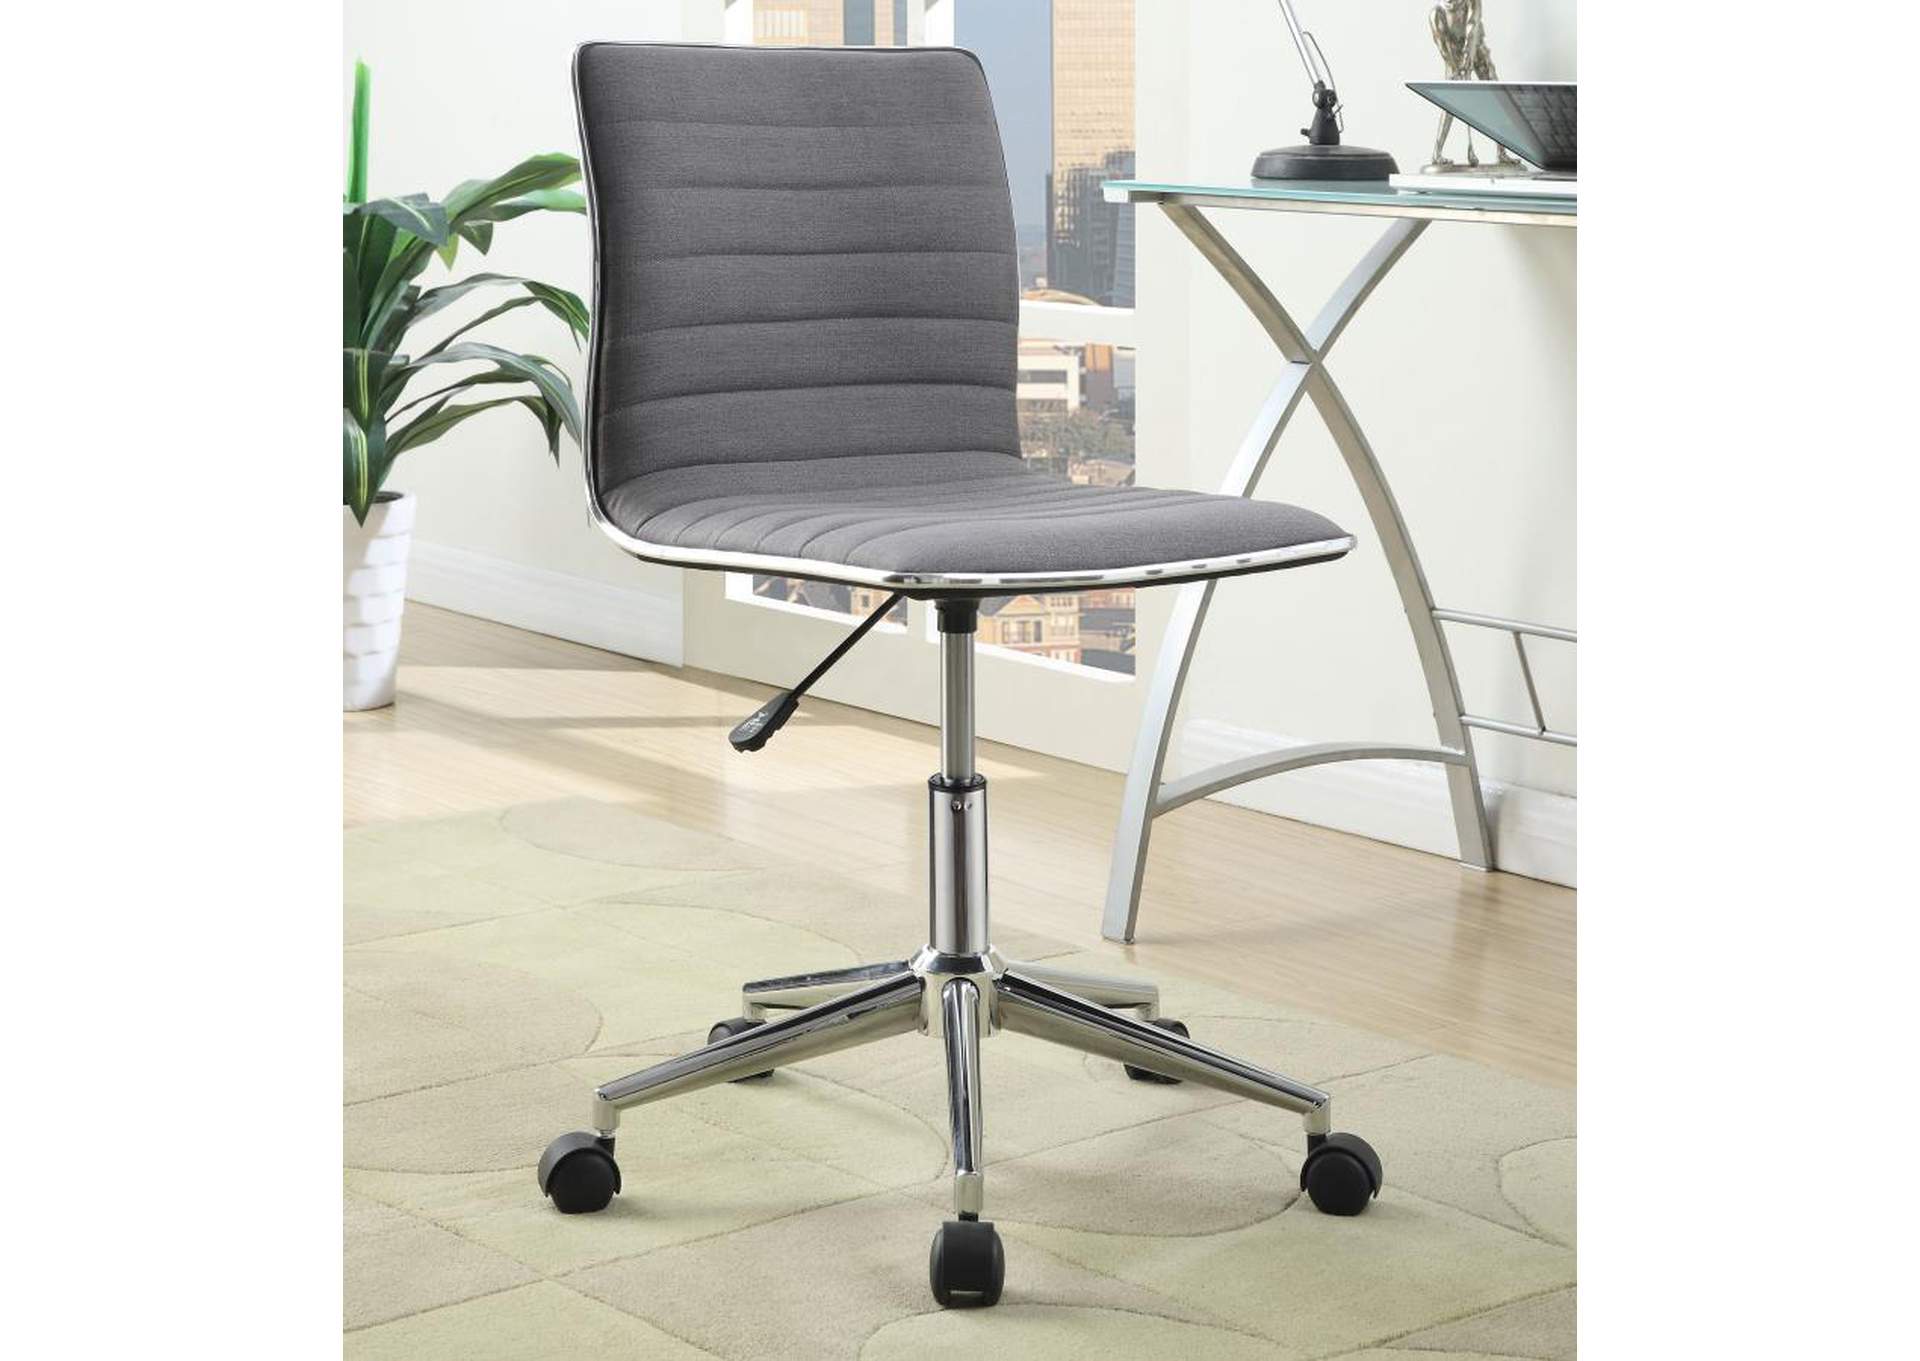 Chryses Adjustable Height Office Chair Grey And Chrome,Coaster Furniture